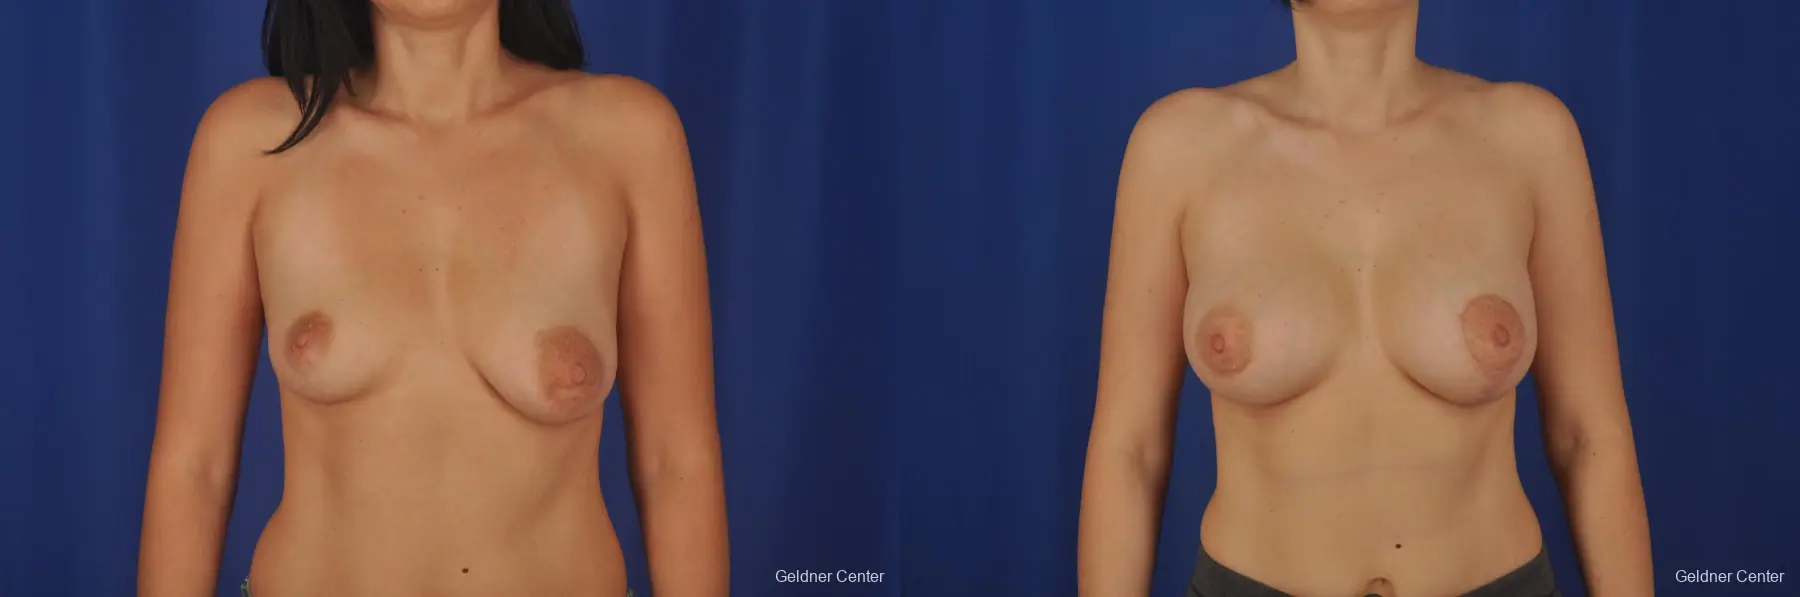 Breast Lift Lake Shore Dr, Chicago 2307 - Before and After 1